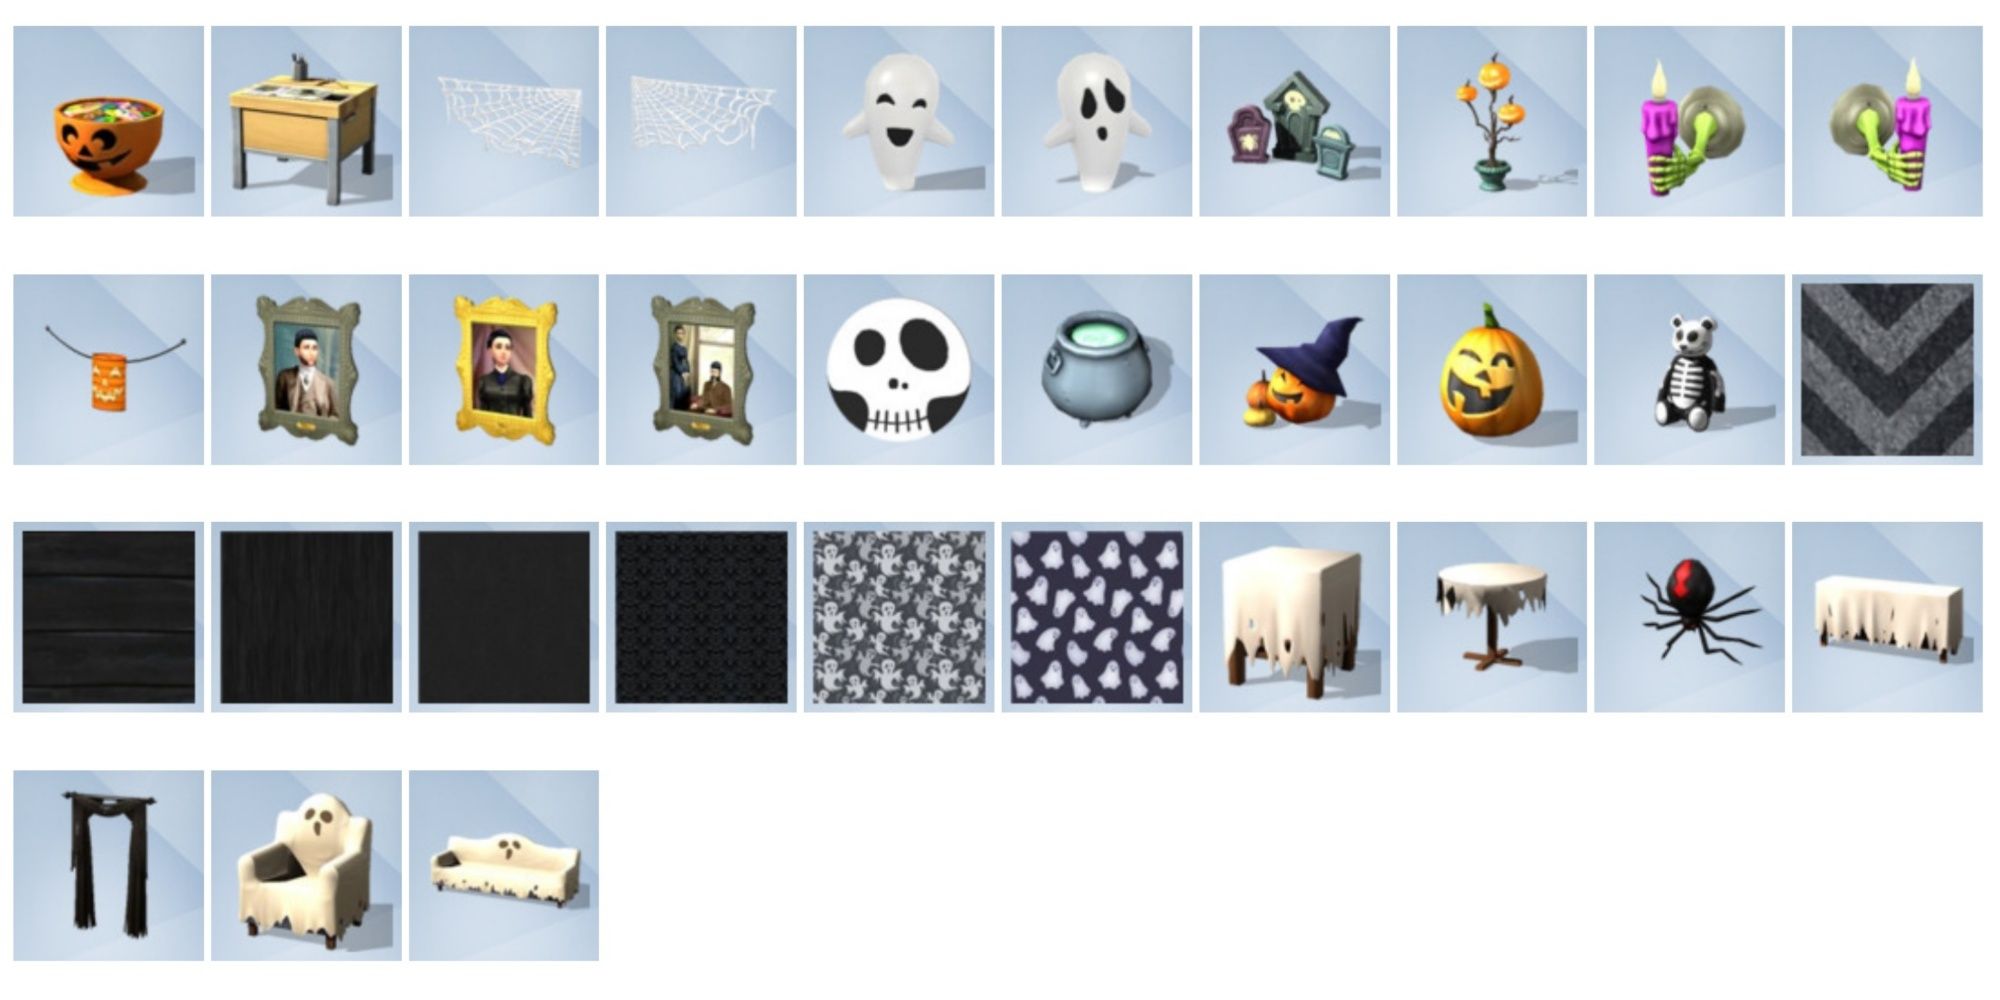 The Ultimate Spooky Guide for The Sims 4: New Items, Parties, and